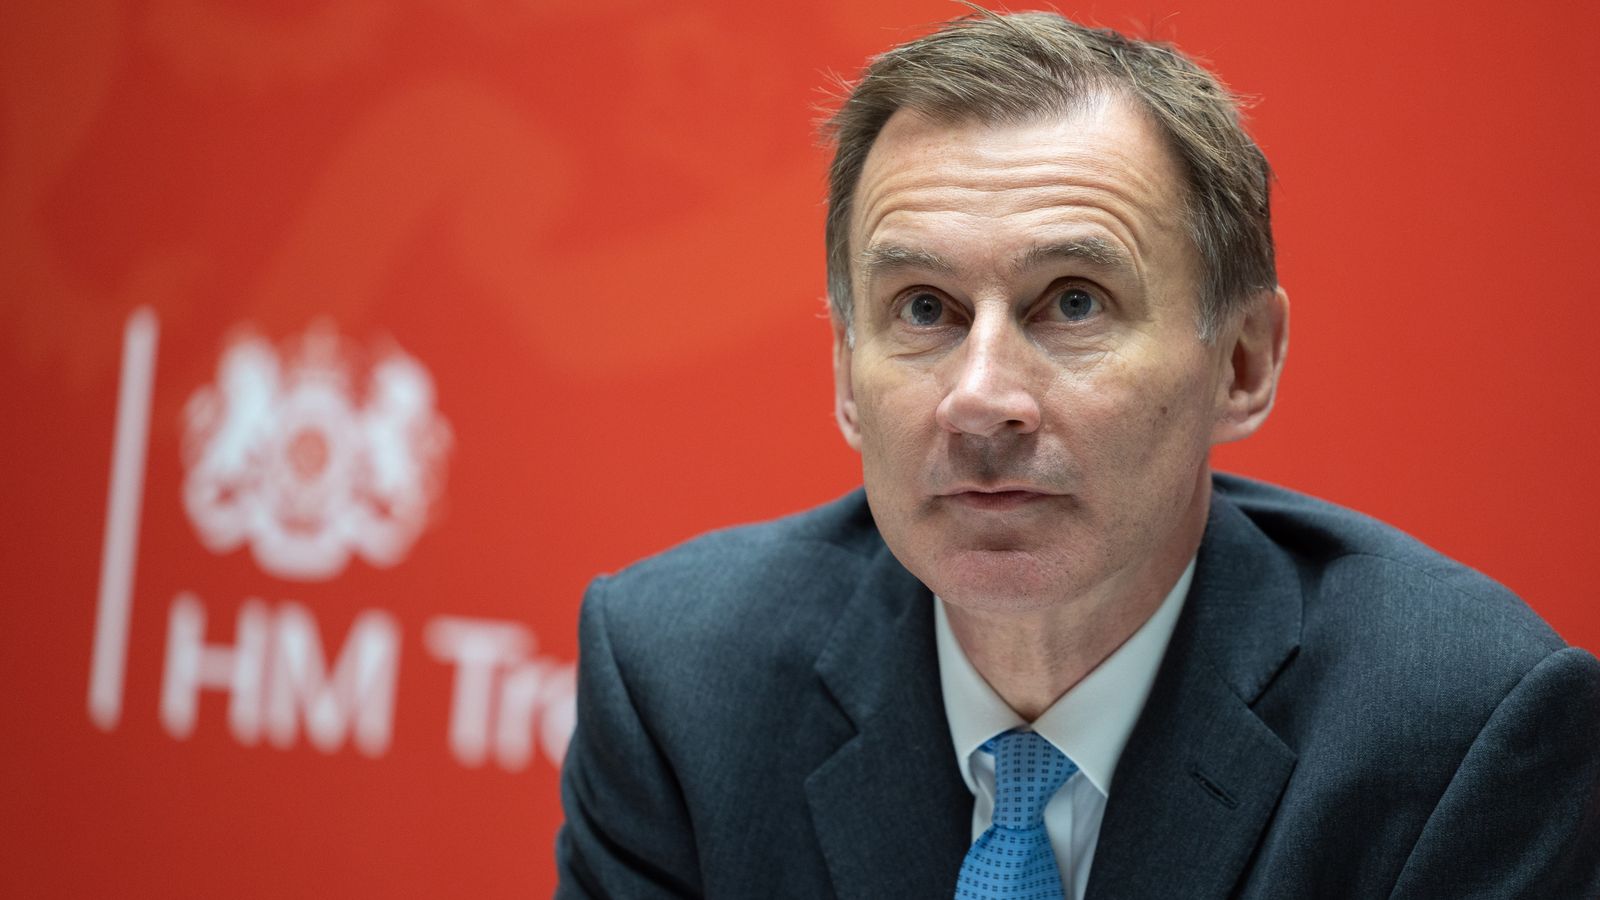 Jeremy Hunt reveals he caught cancer early after discovering mole which 'grew and grew'